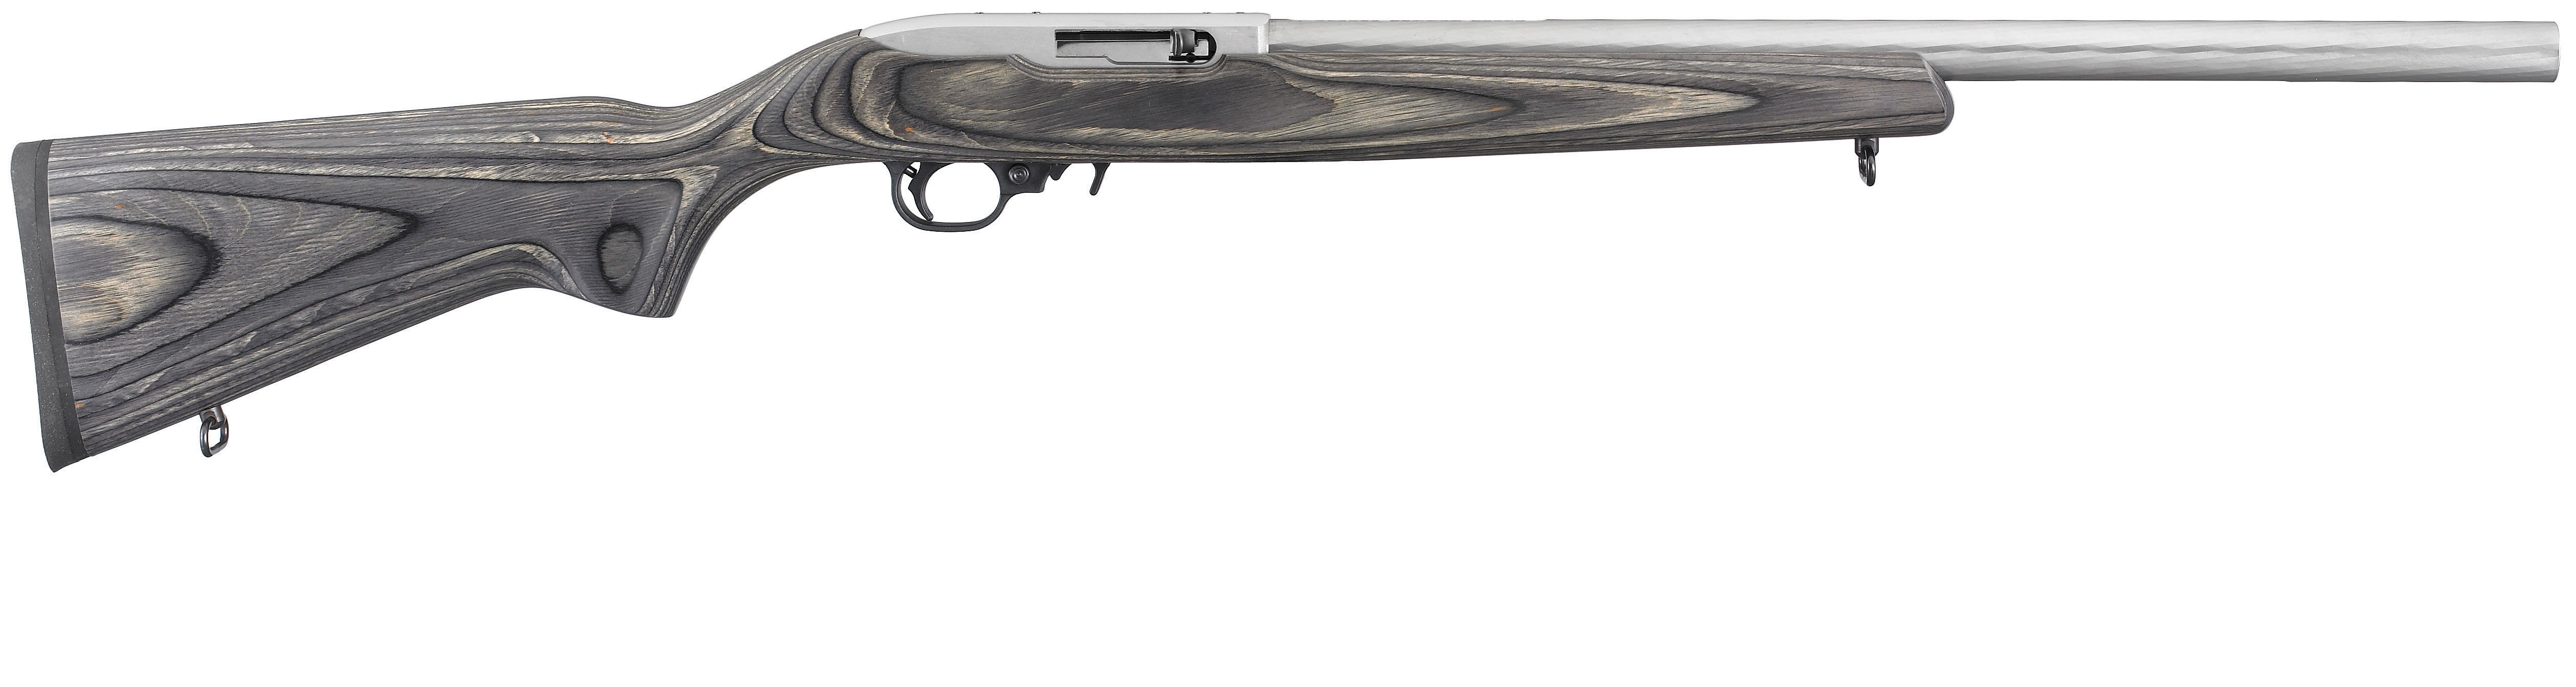 Weapons Ruger 10 22 Rifle 5024x1340